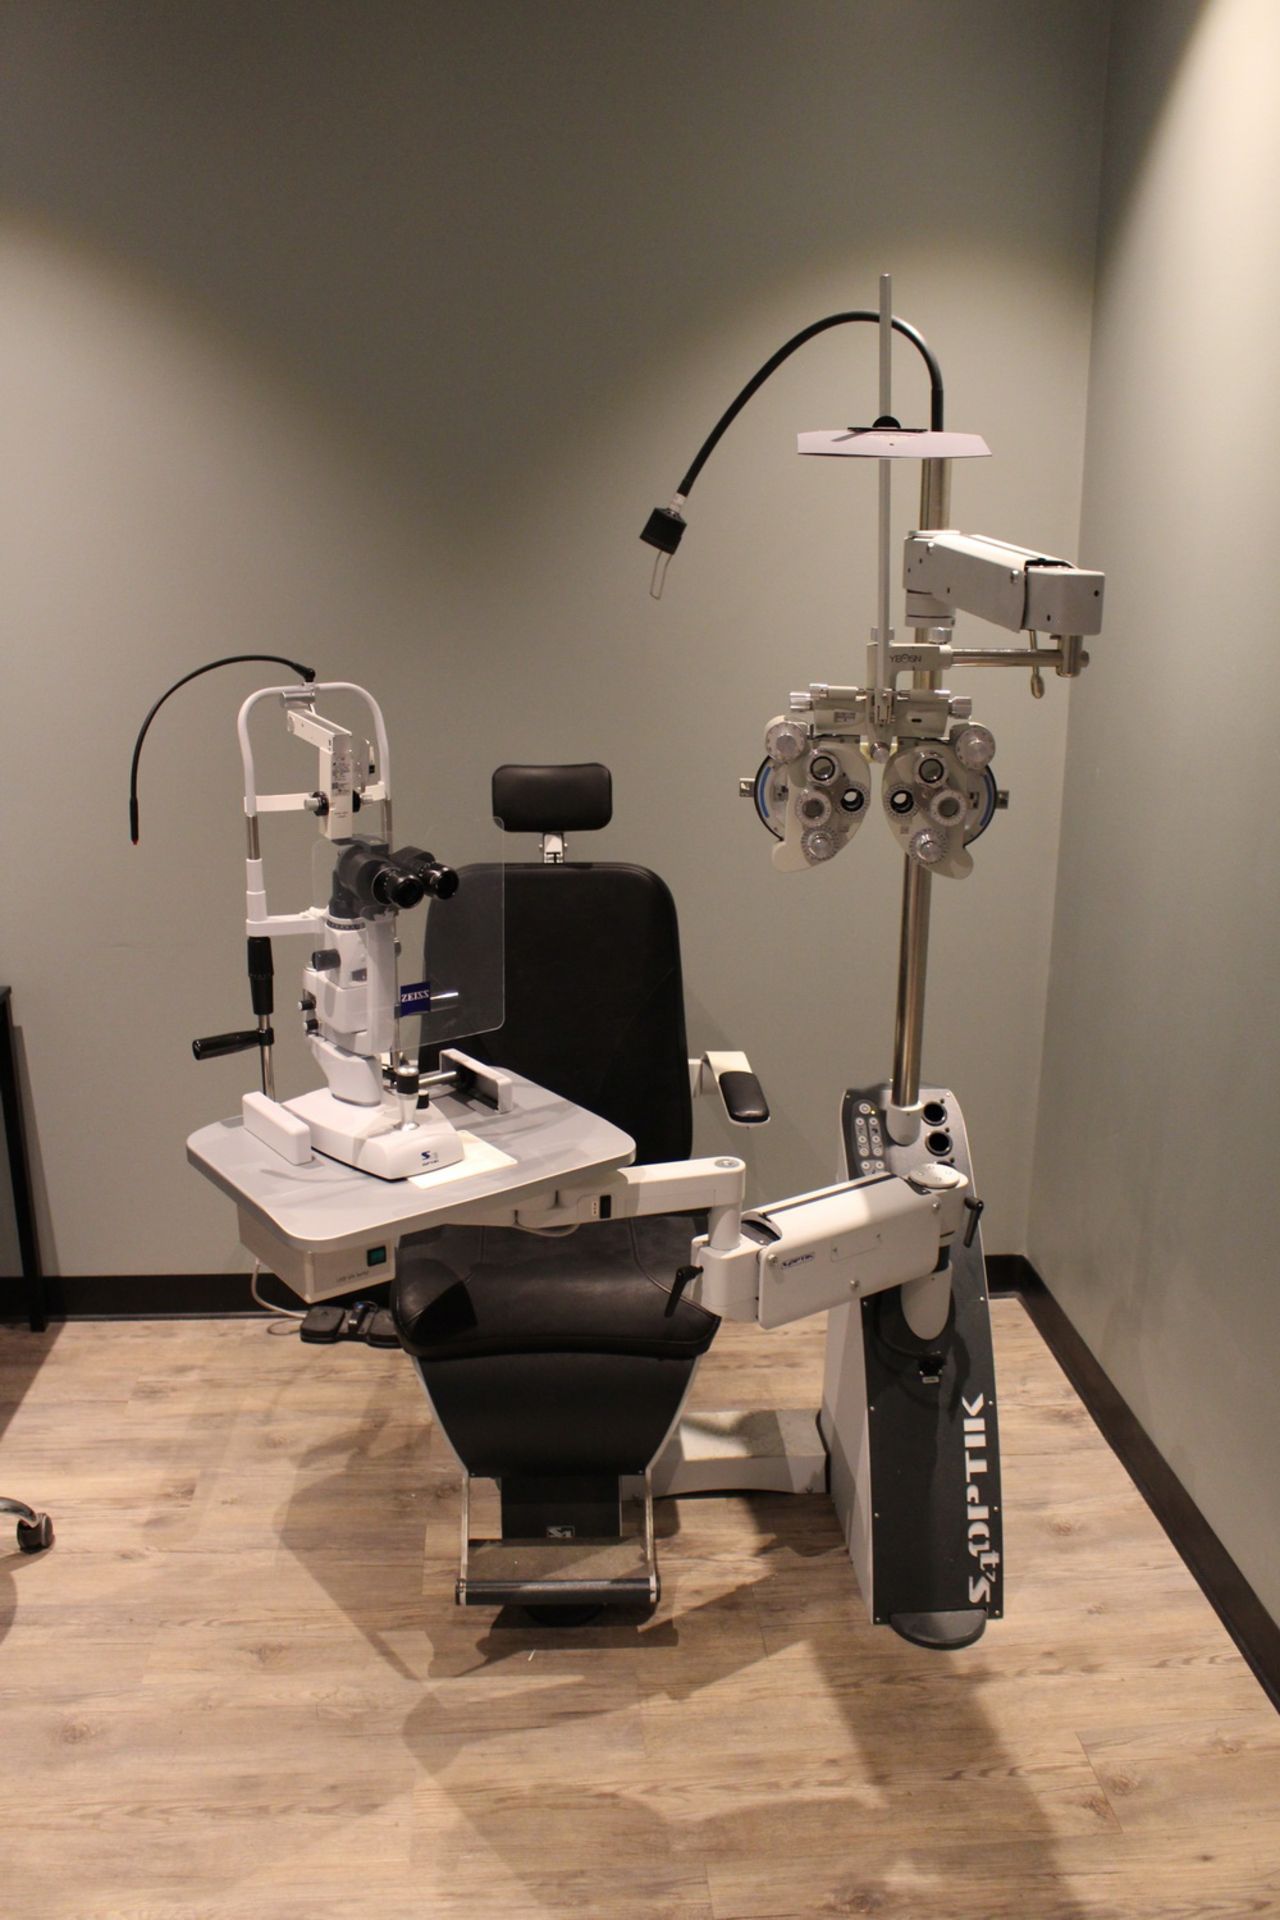 2018 S4OPTIK MODEL 1800 OPHTHALMOLOGY EXAMINATION CHAIR & STAND, S/N 315-1800-049 C/W 2017 YEOSN